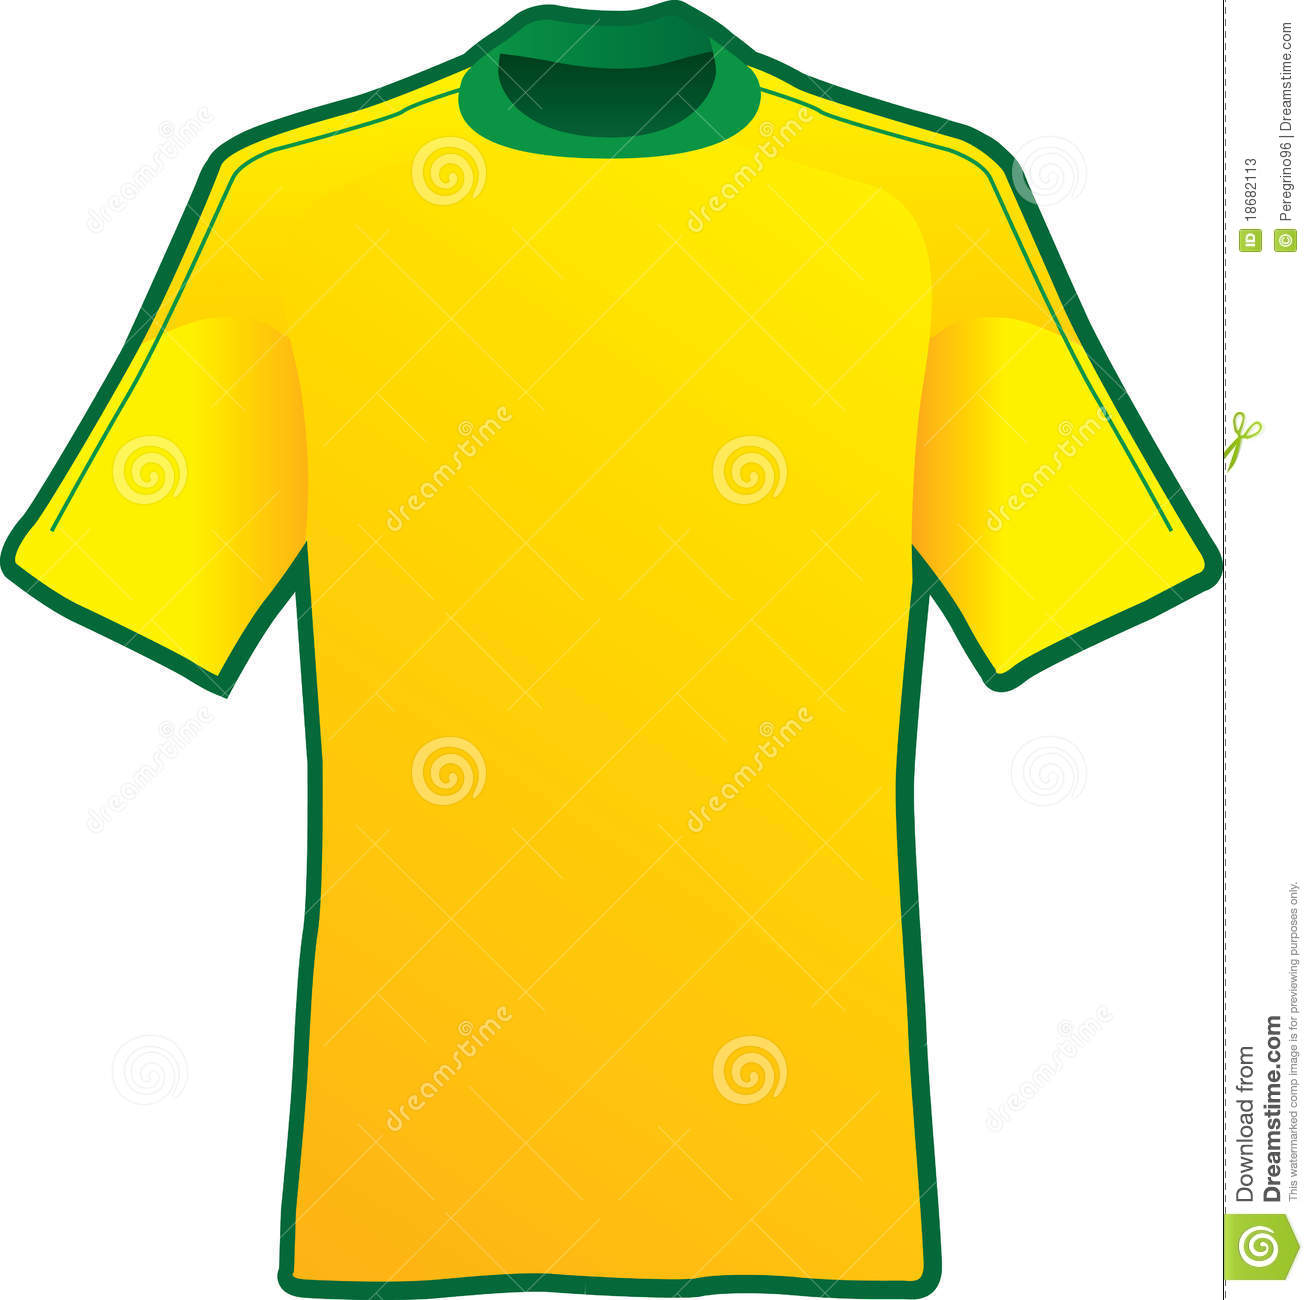 Yellow T Shirt Illustration Of A Player Soccer Of Brazil Team